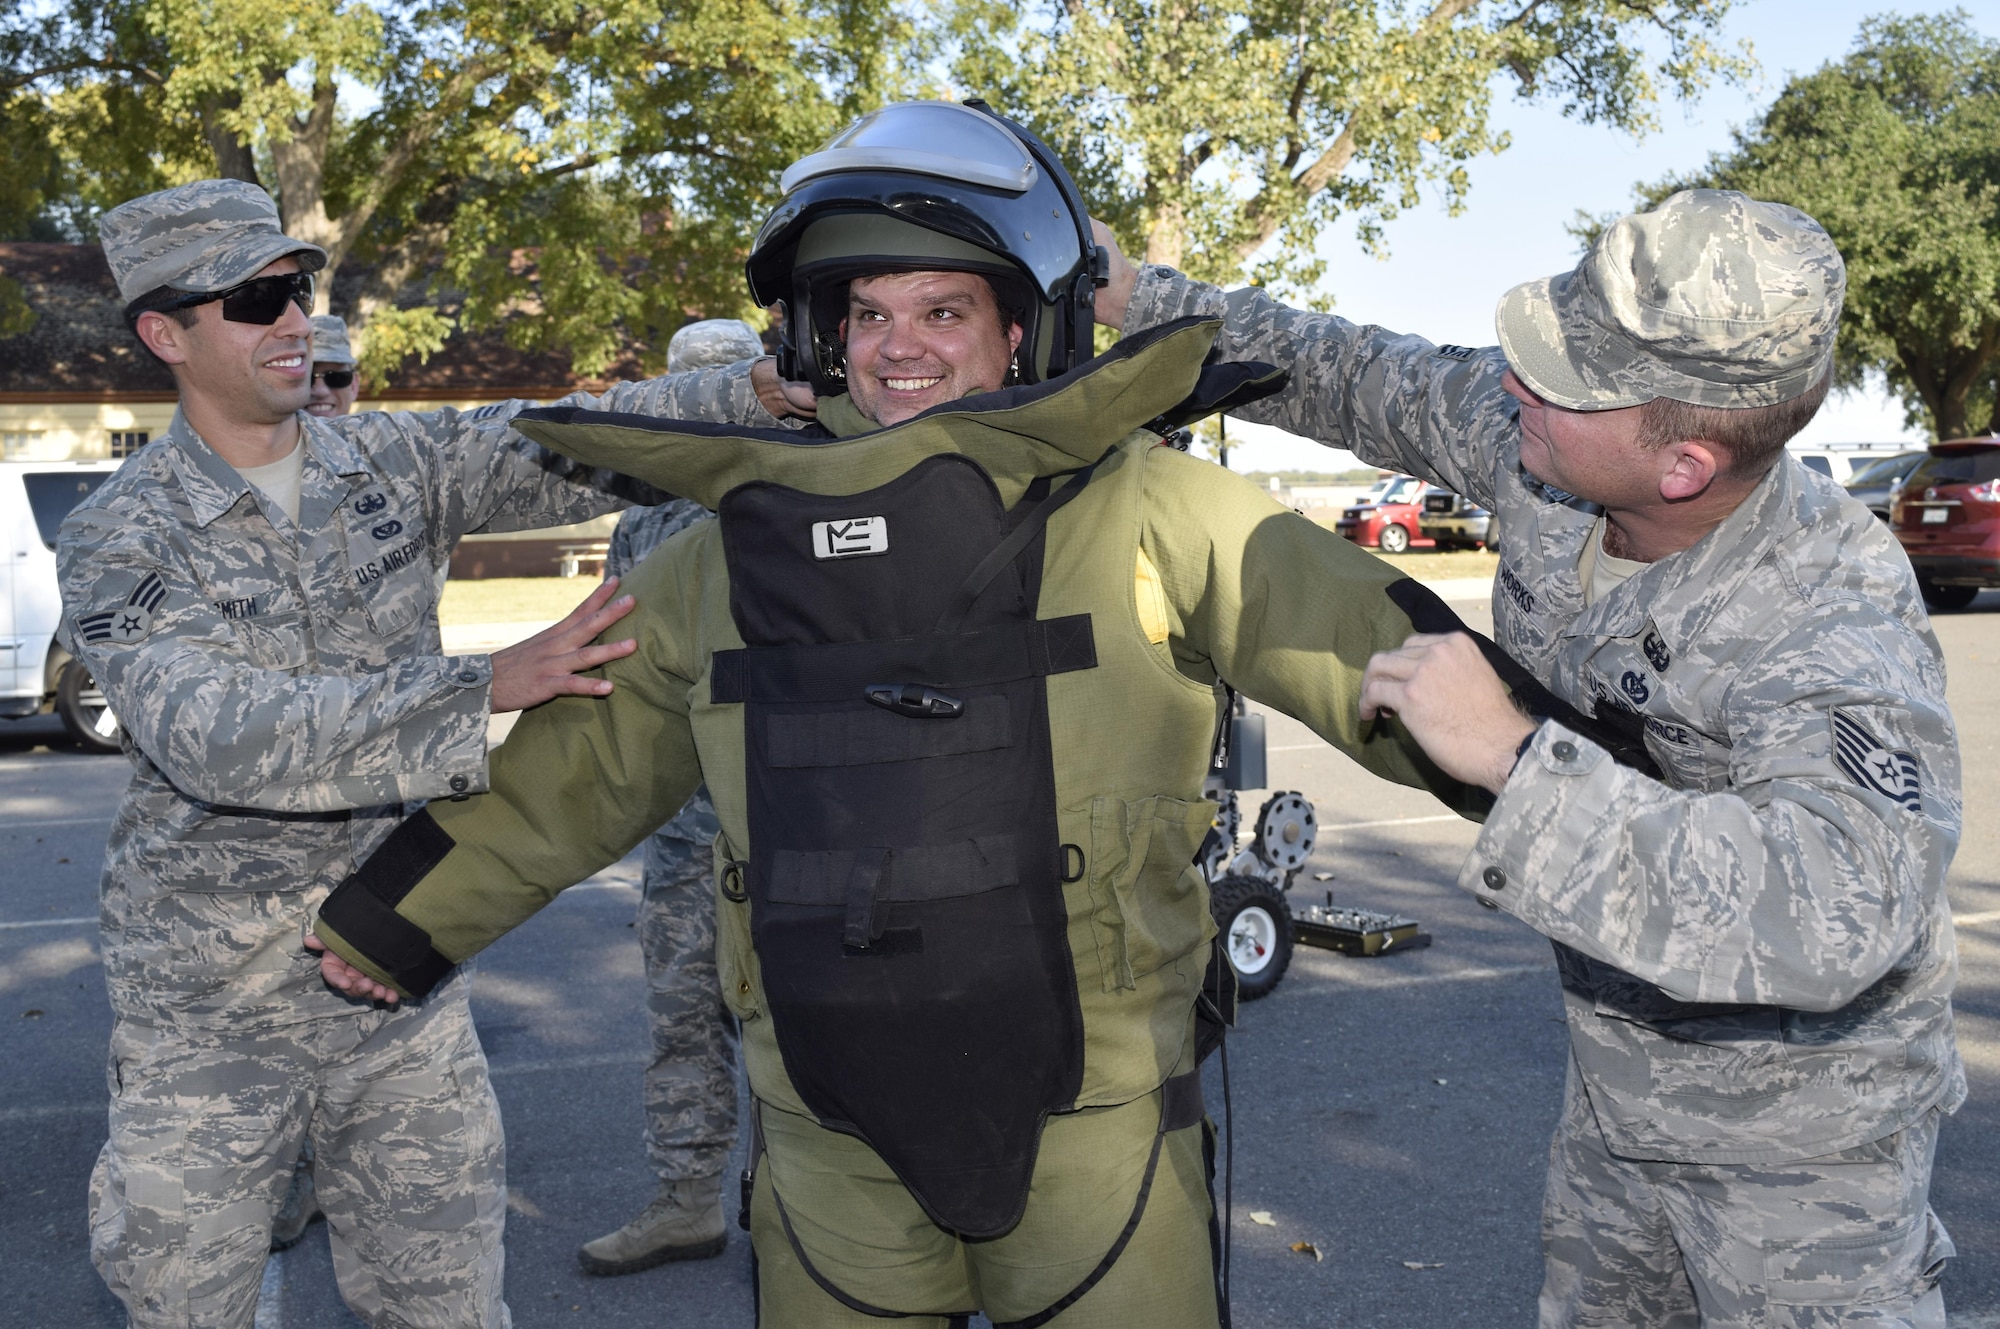 Senior Airman J. Michael Smith left, and Tech. Sgt. Paul Works, right, both with the 2nd Civil Engineer Squadron Explosive Ordnance Disposal flight, secure Matthew Haby of Haby Reality into an EOD 9 bomb suit Oct. 27, 2016 at Barksdale Air Force Base,  Louisiana. The demonstration was part of a civic leader tour sponsored by the 433rd Airlift Wing and hosted by the 307th Bomb Wing. (U.S. Air Force photo by Tech. Sgt. Lindsey Maurice)  